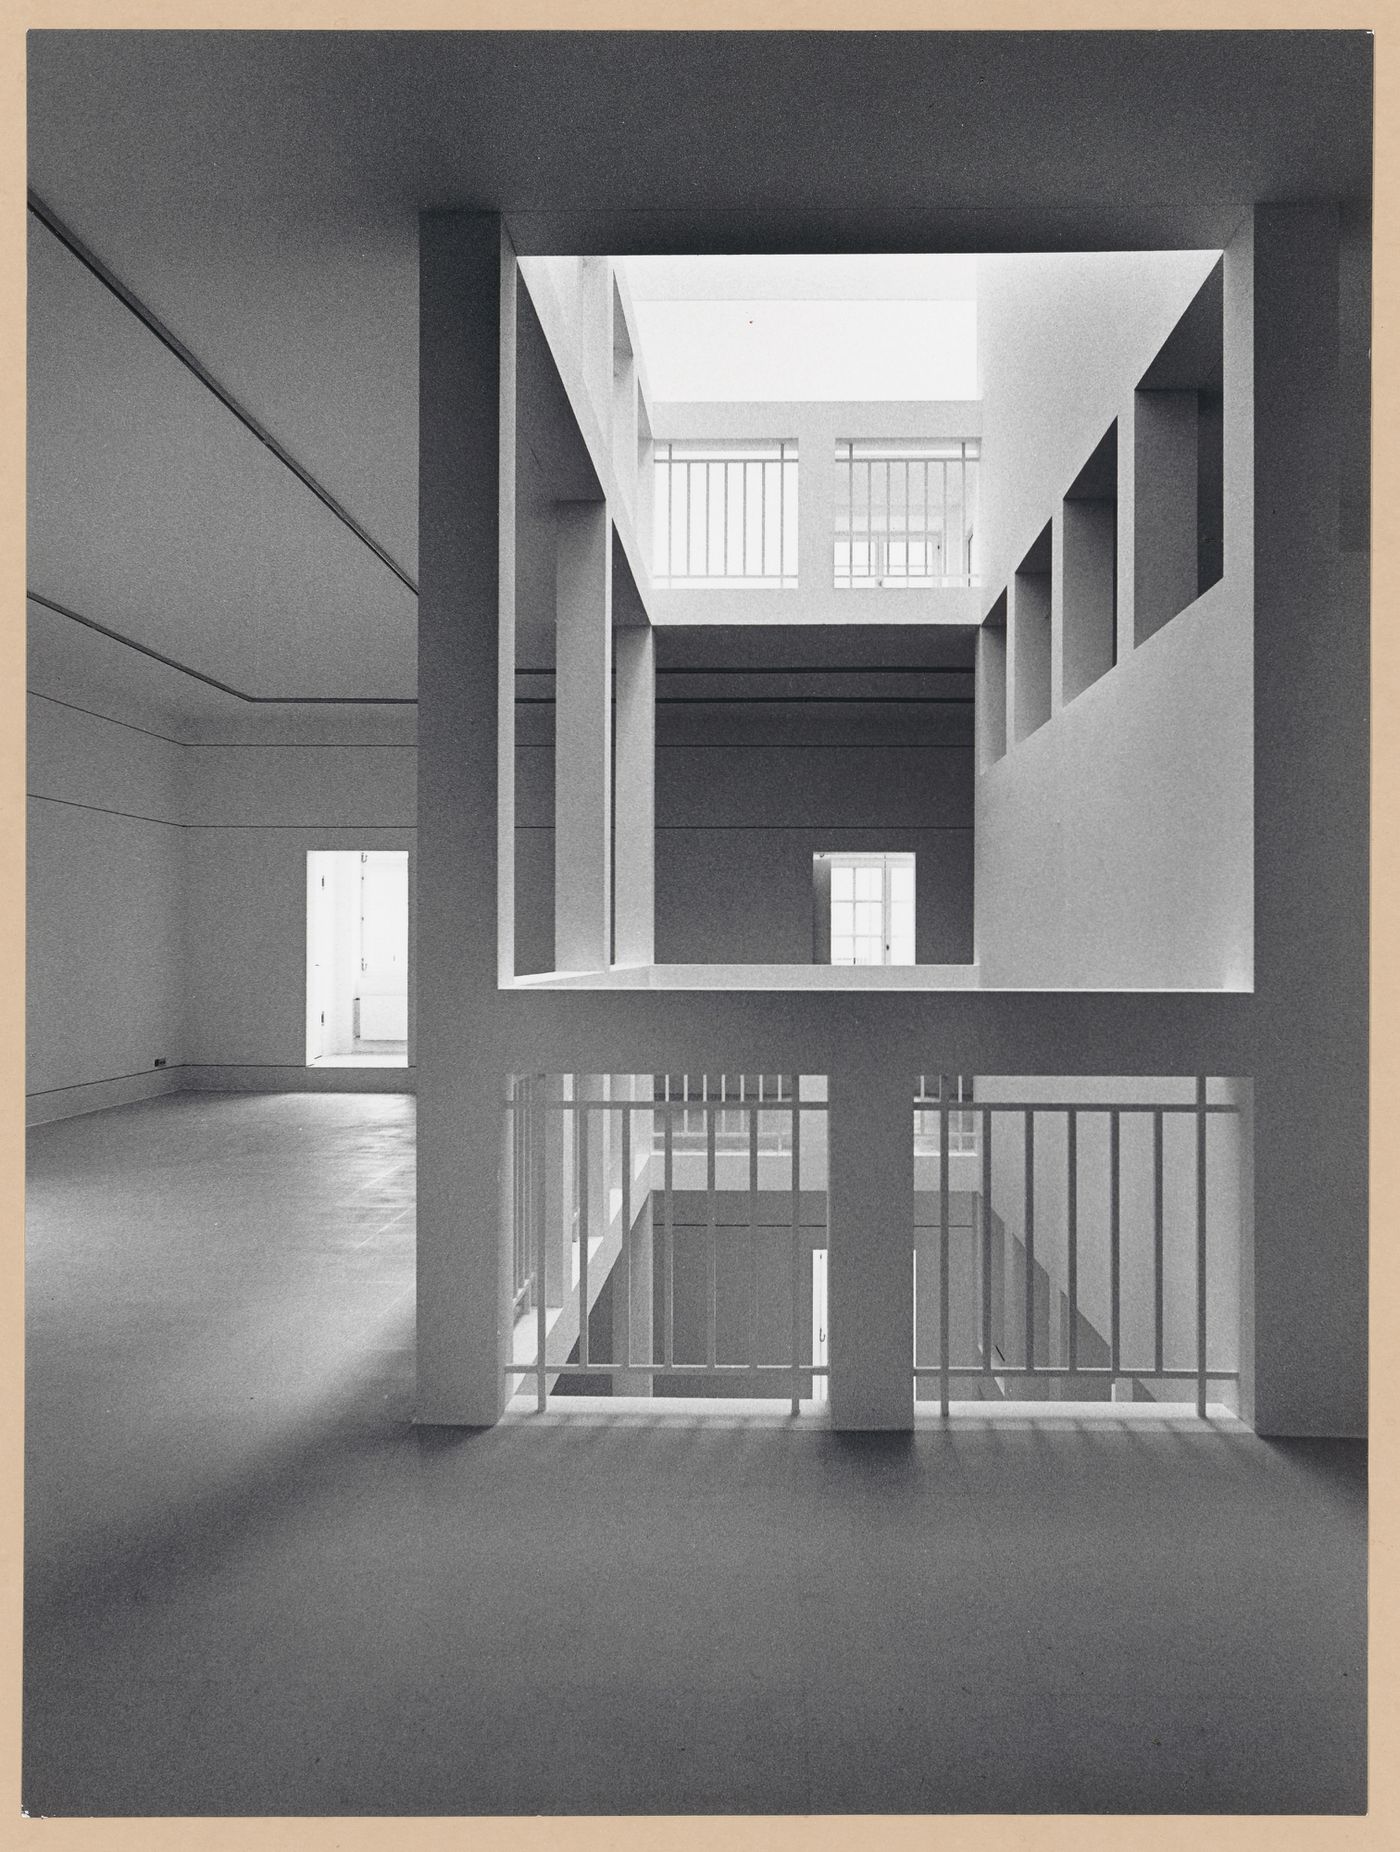 Interior view of the Deutsches Architekturmuseum [German Architecture Museum] showing a light well and the exhibition areas on the fourth level with the second storey of the House-in-House on the right, Schaumainkai 43, Frankfurt am Main, Germany